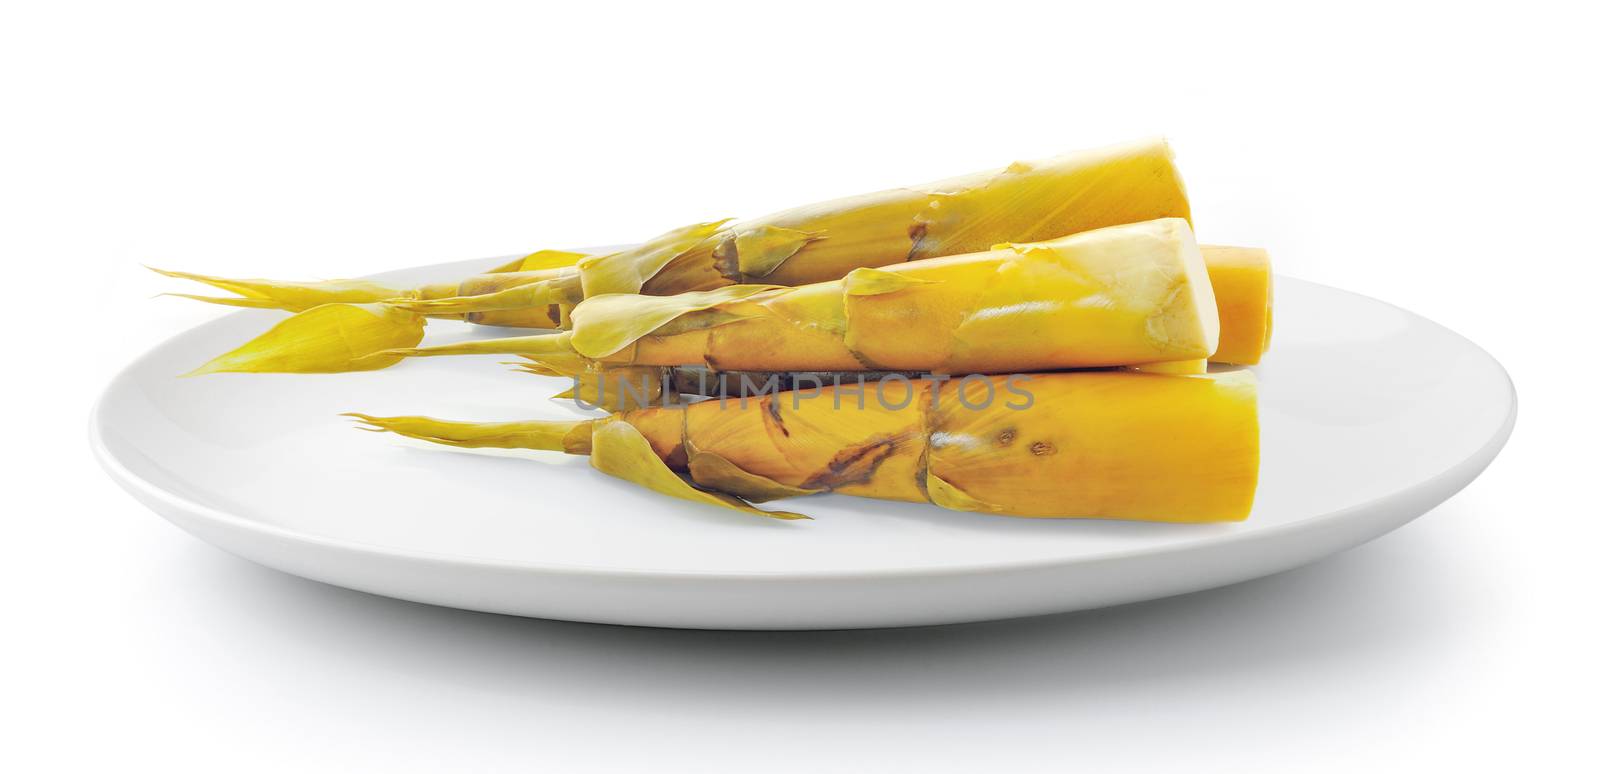 Bamboo shoot in plate isolated on a white background